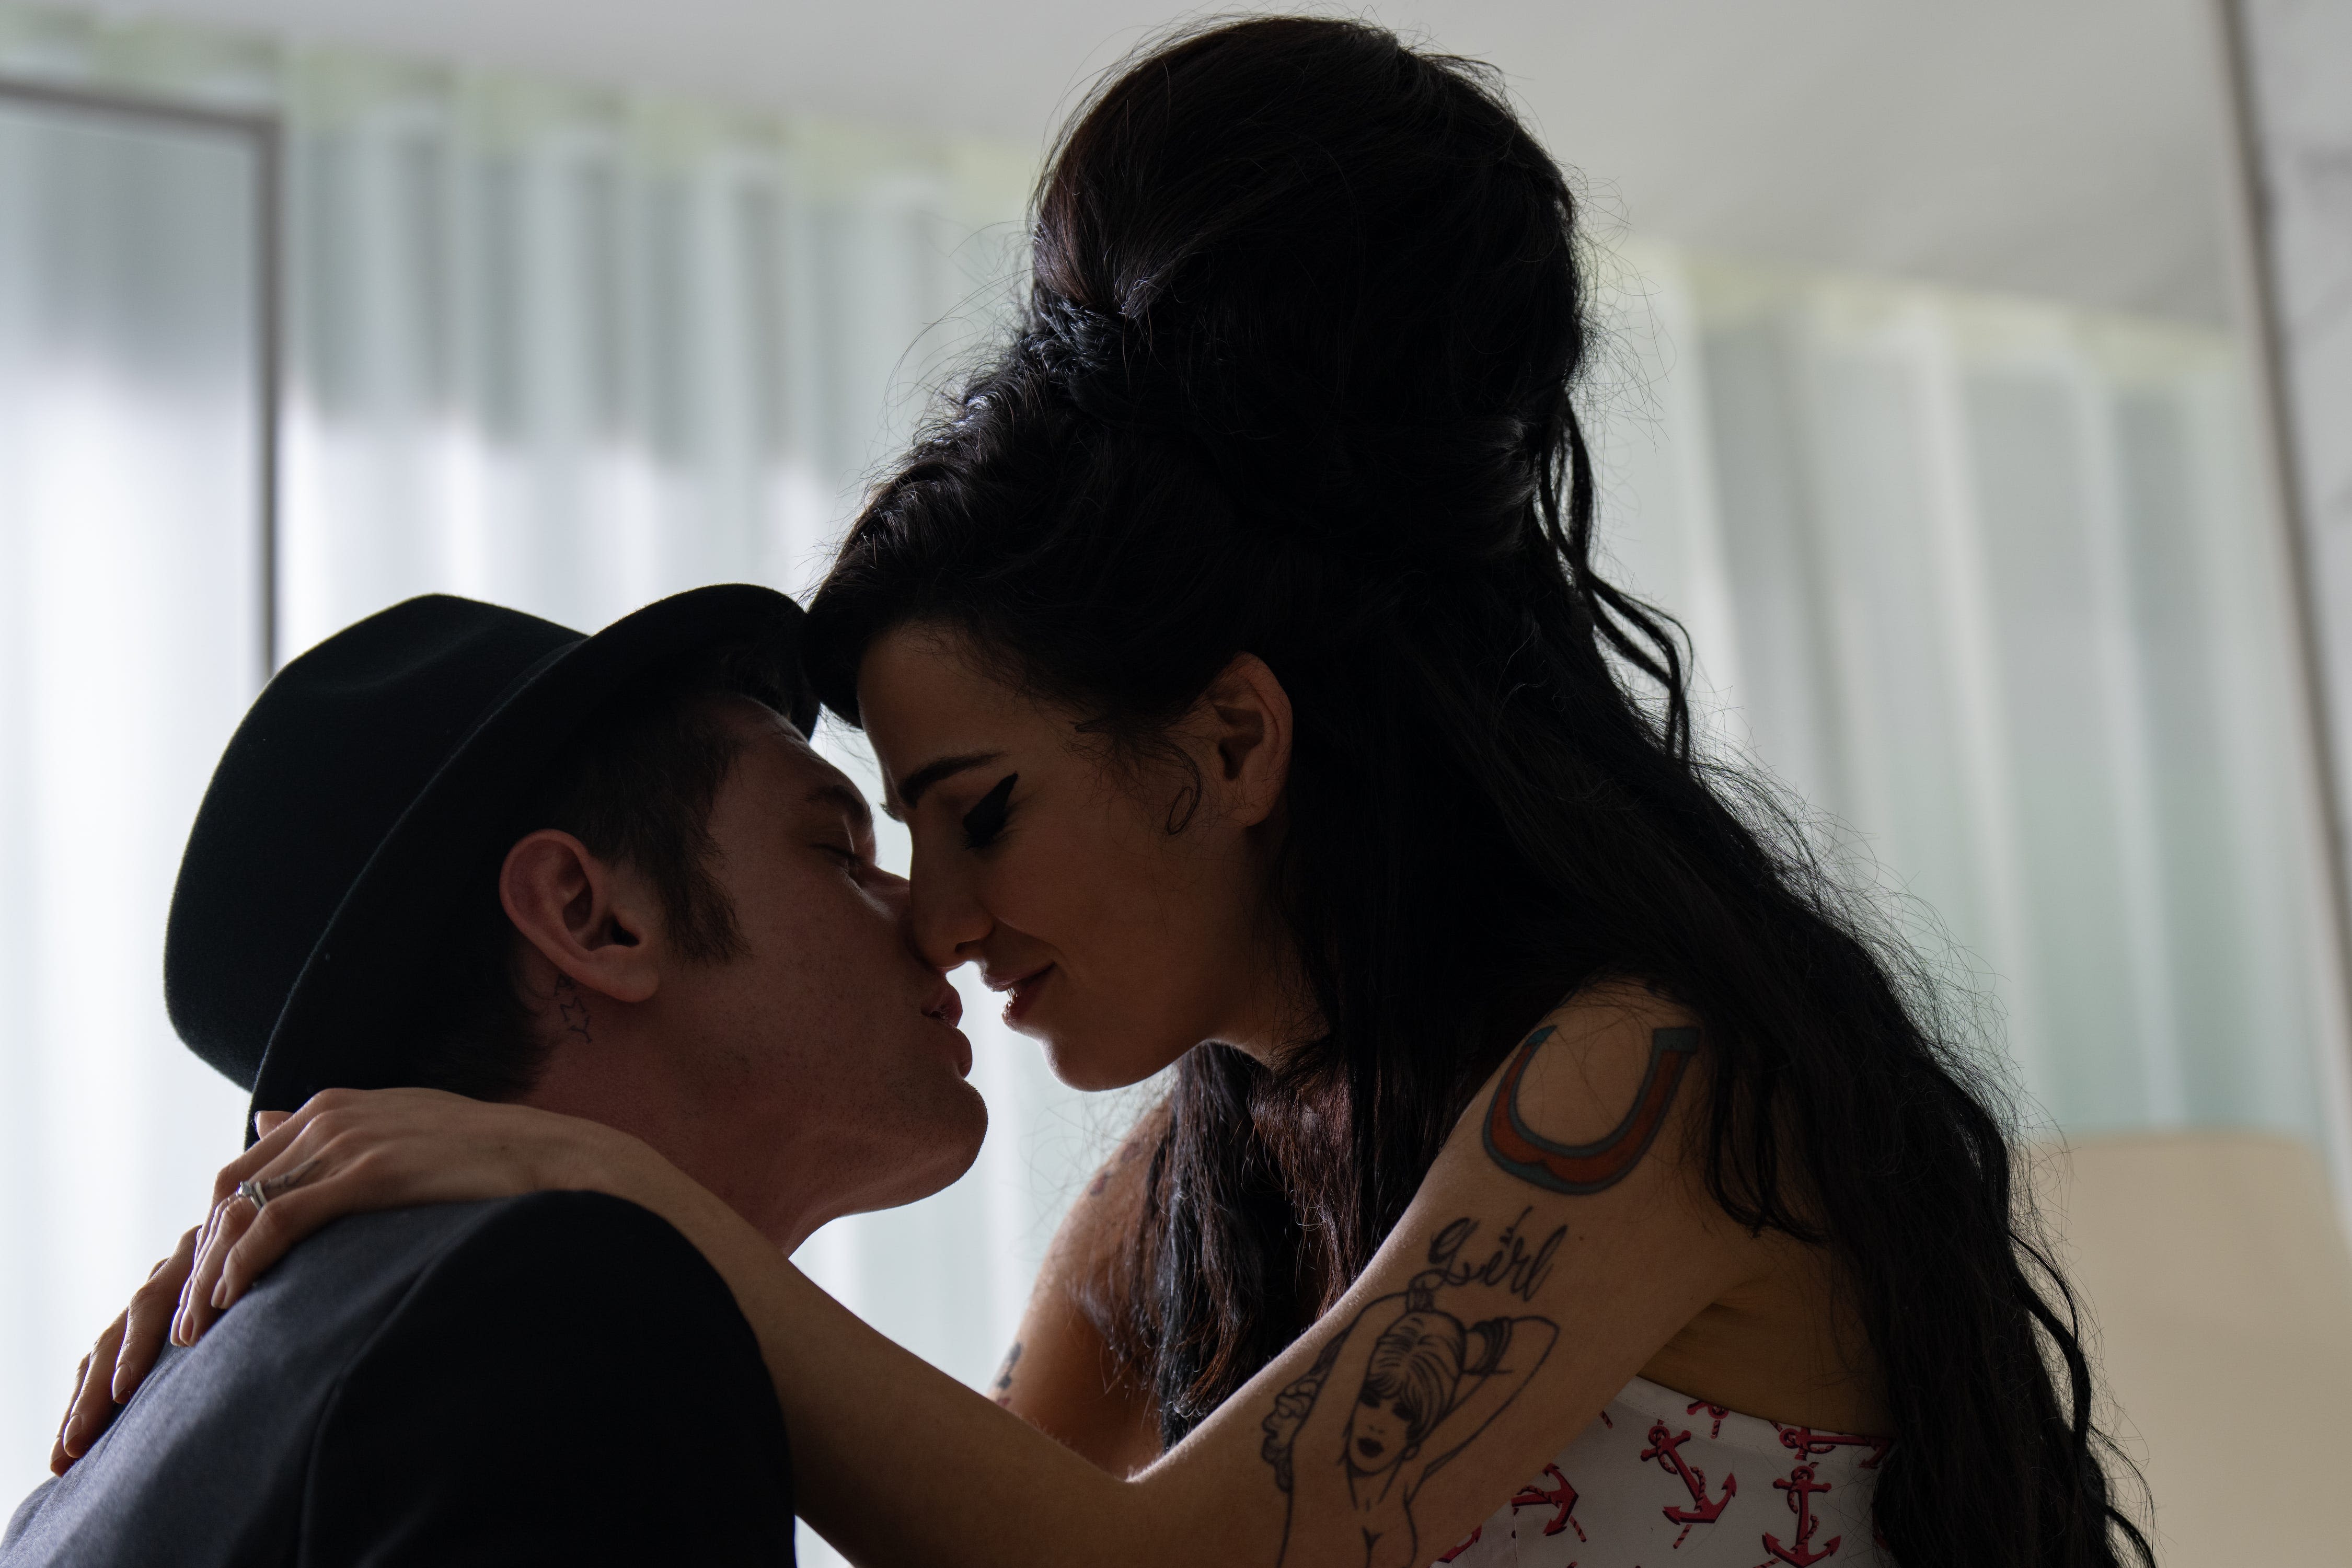 The Amy Winehouse 'Back to Black' biopic is flat and forgetful, here's why | Review